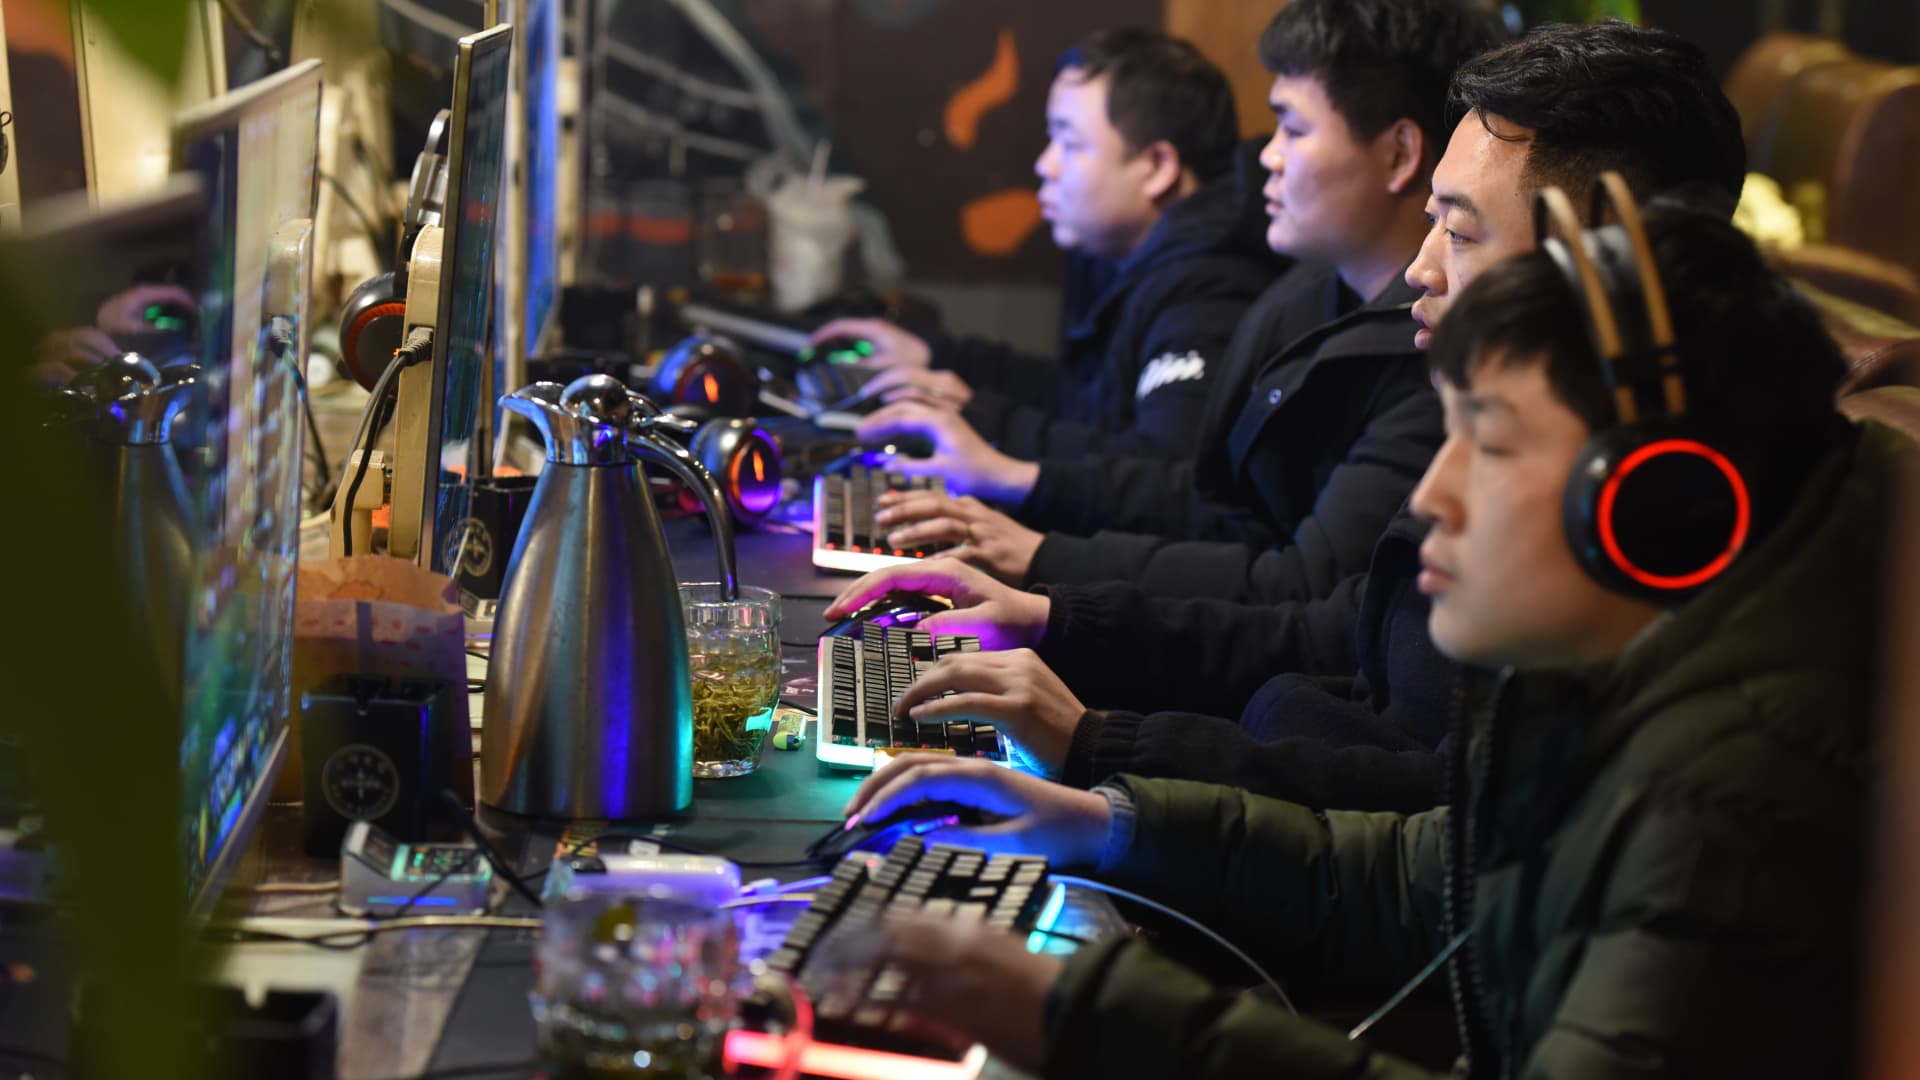 China remains the world’s largest e-sports market despite gaming crackdown